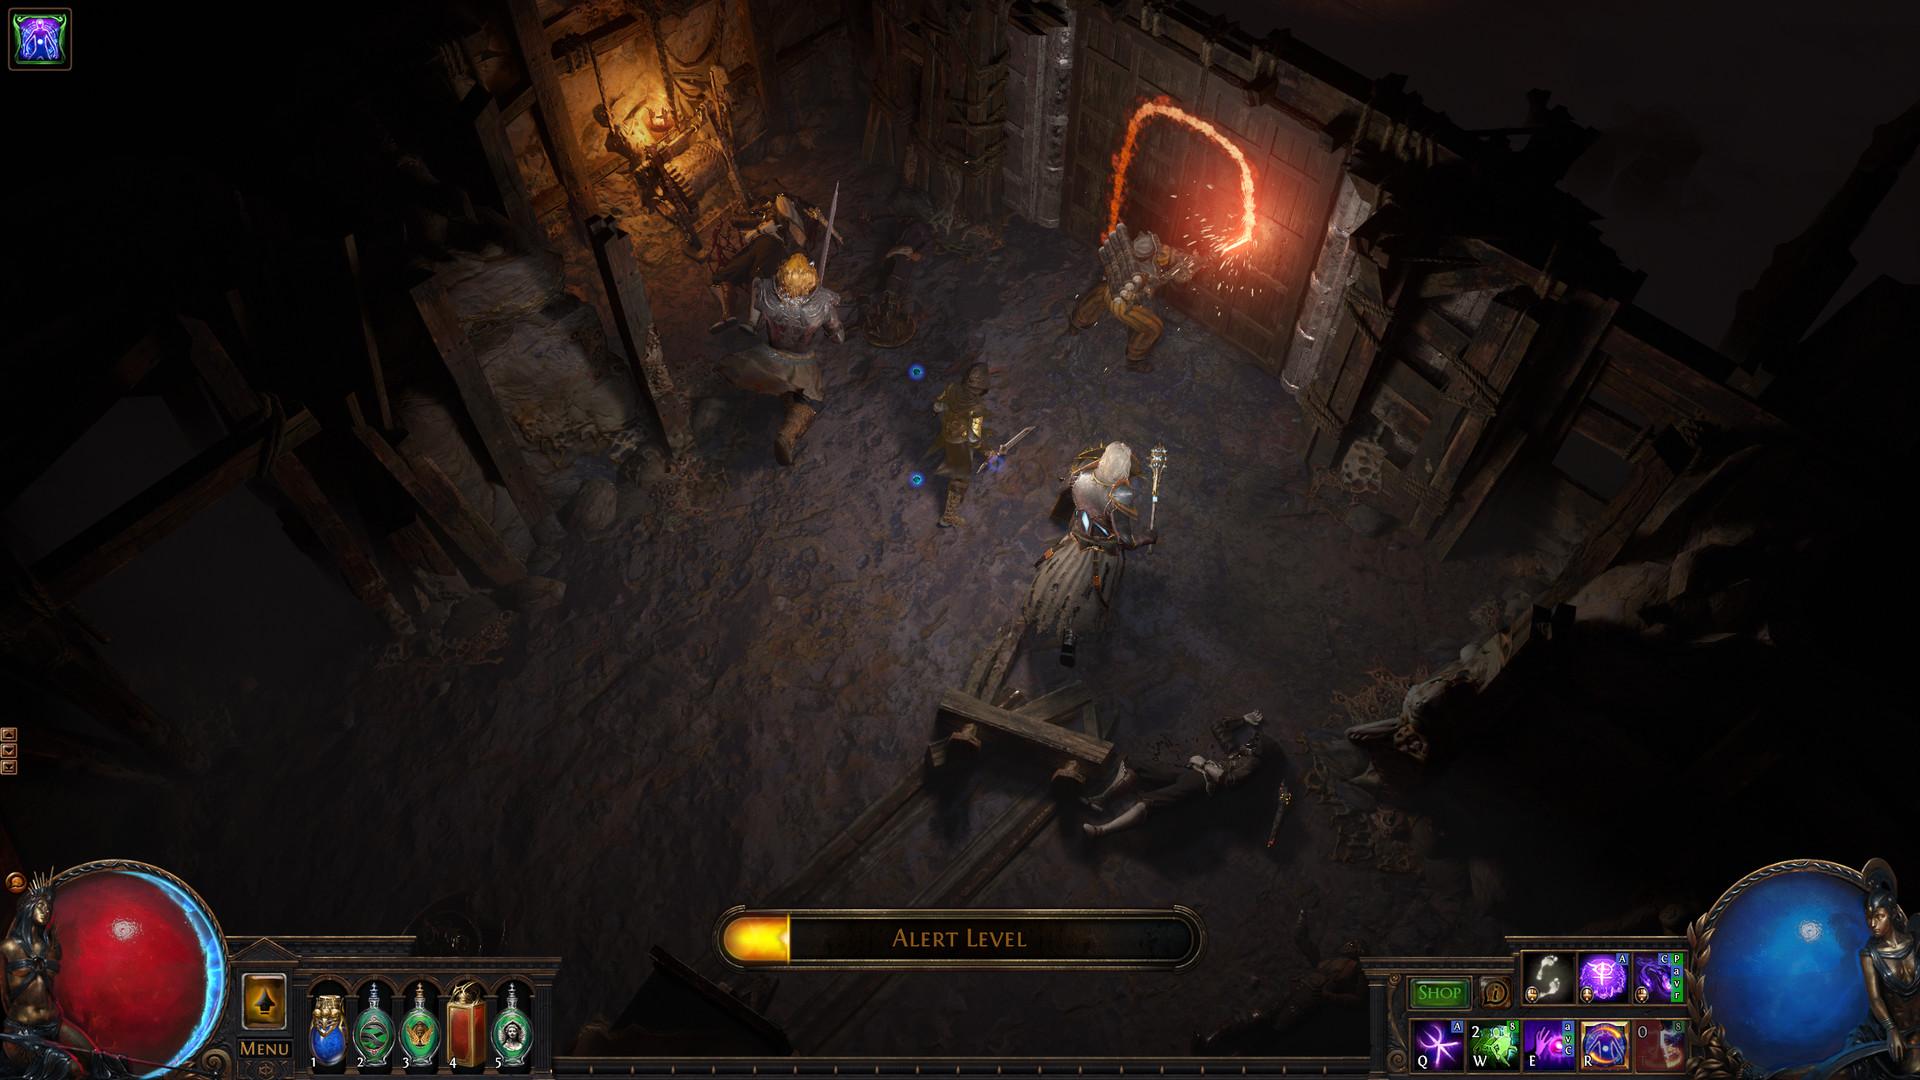 Screenshot №17 from game Path of Exile